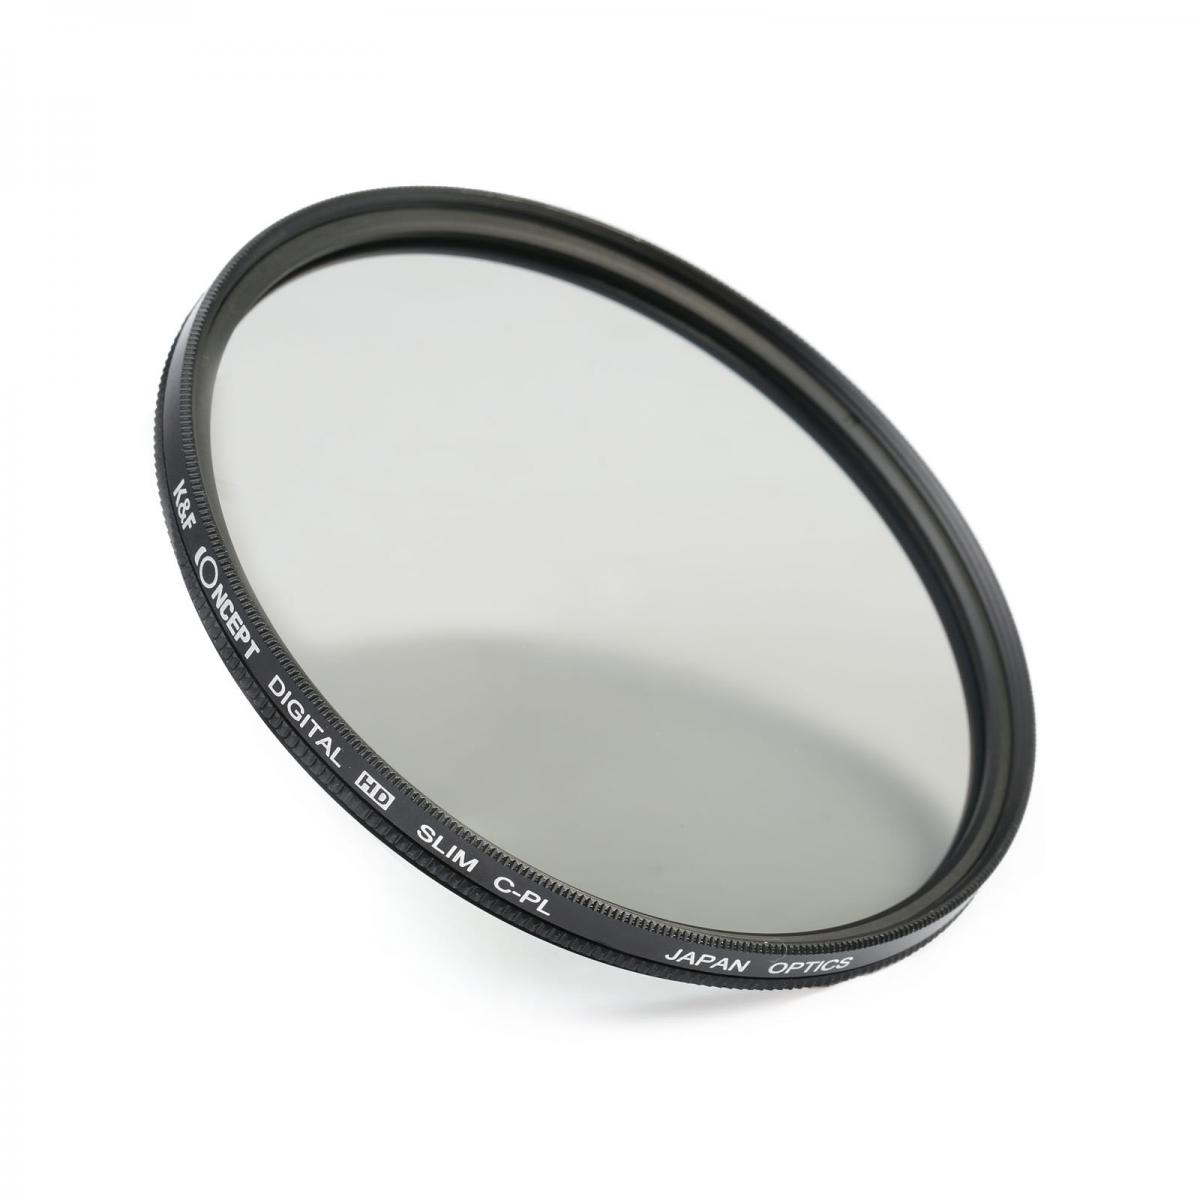 UV Multithreaded Glass Filter for Canon EOS Rebel XTi Haze 1A Multicoated 77mm